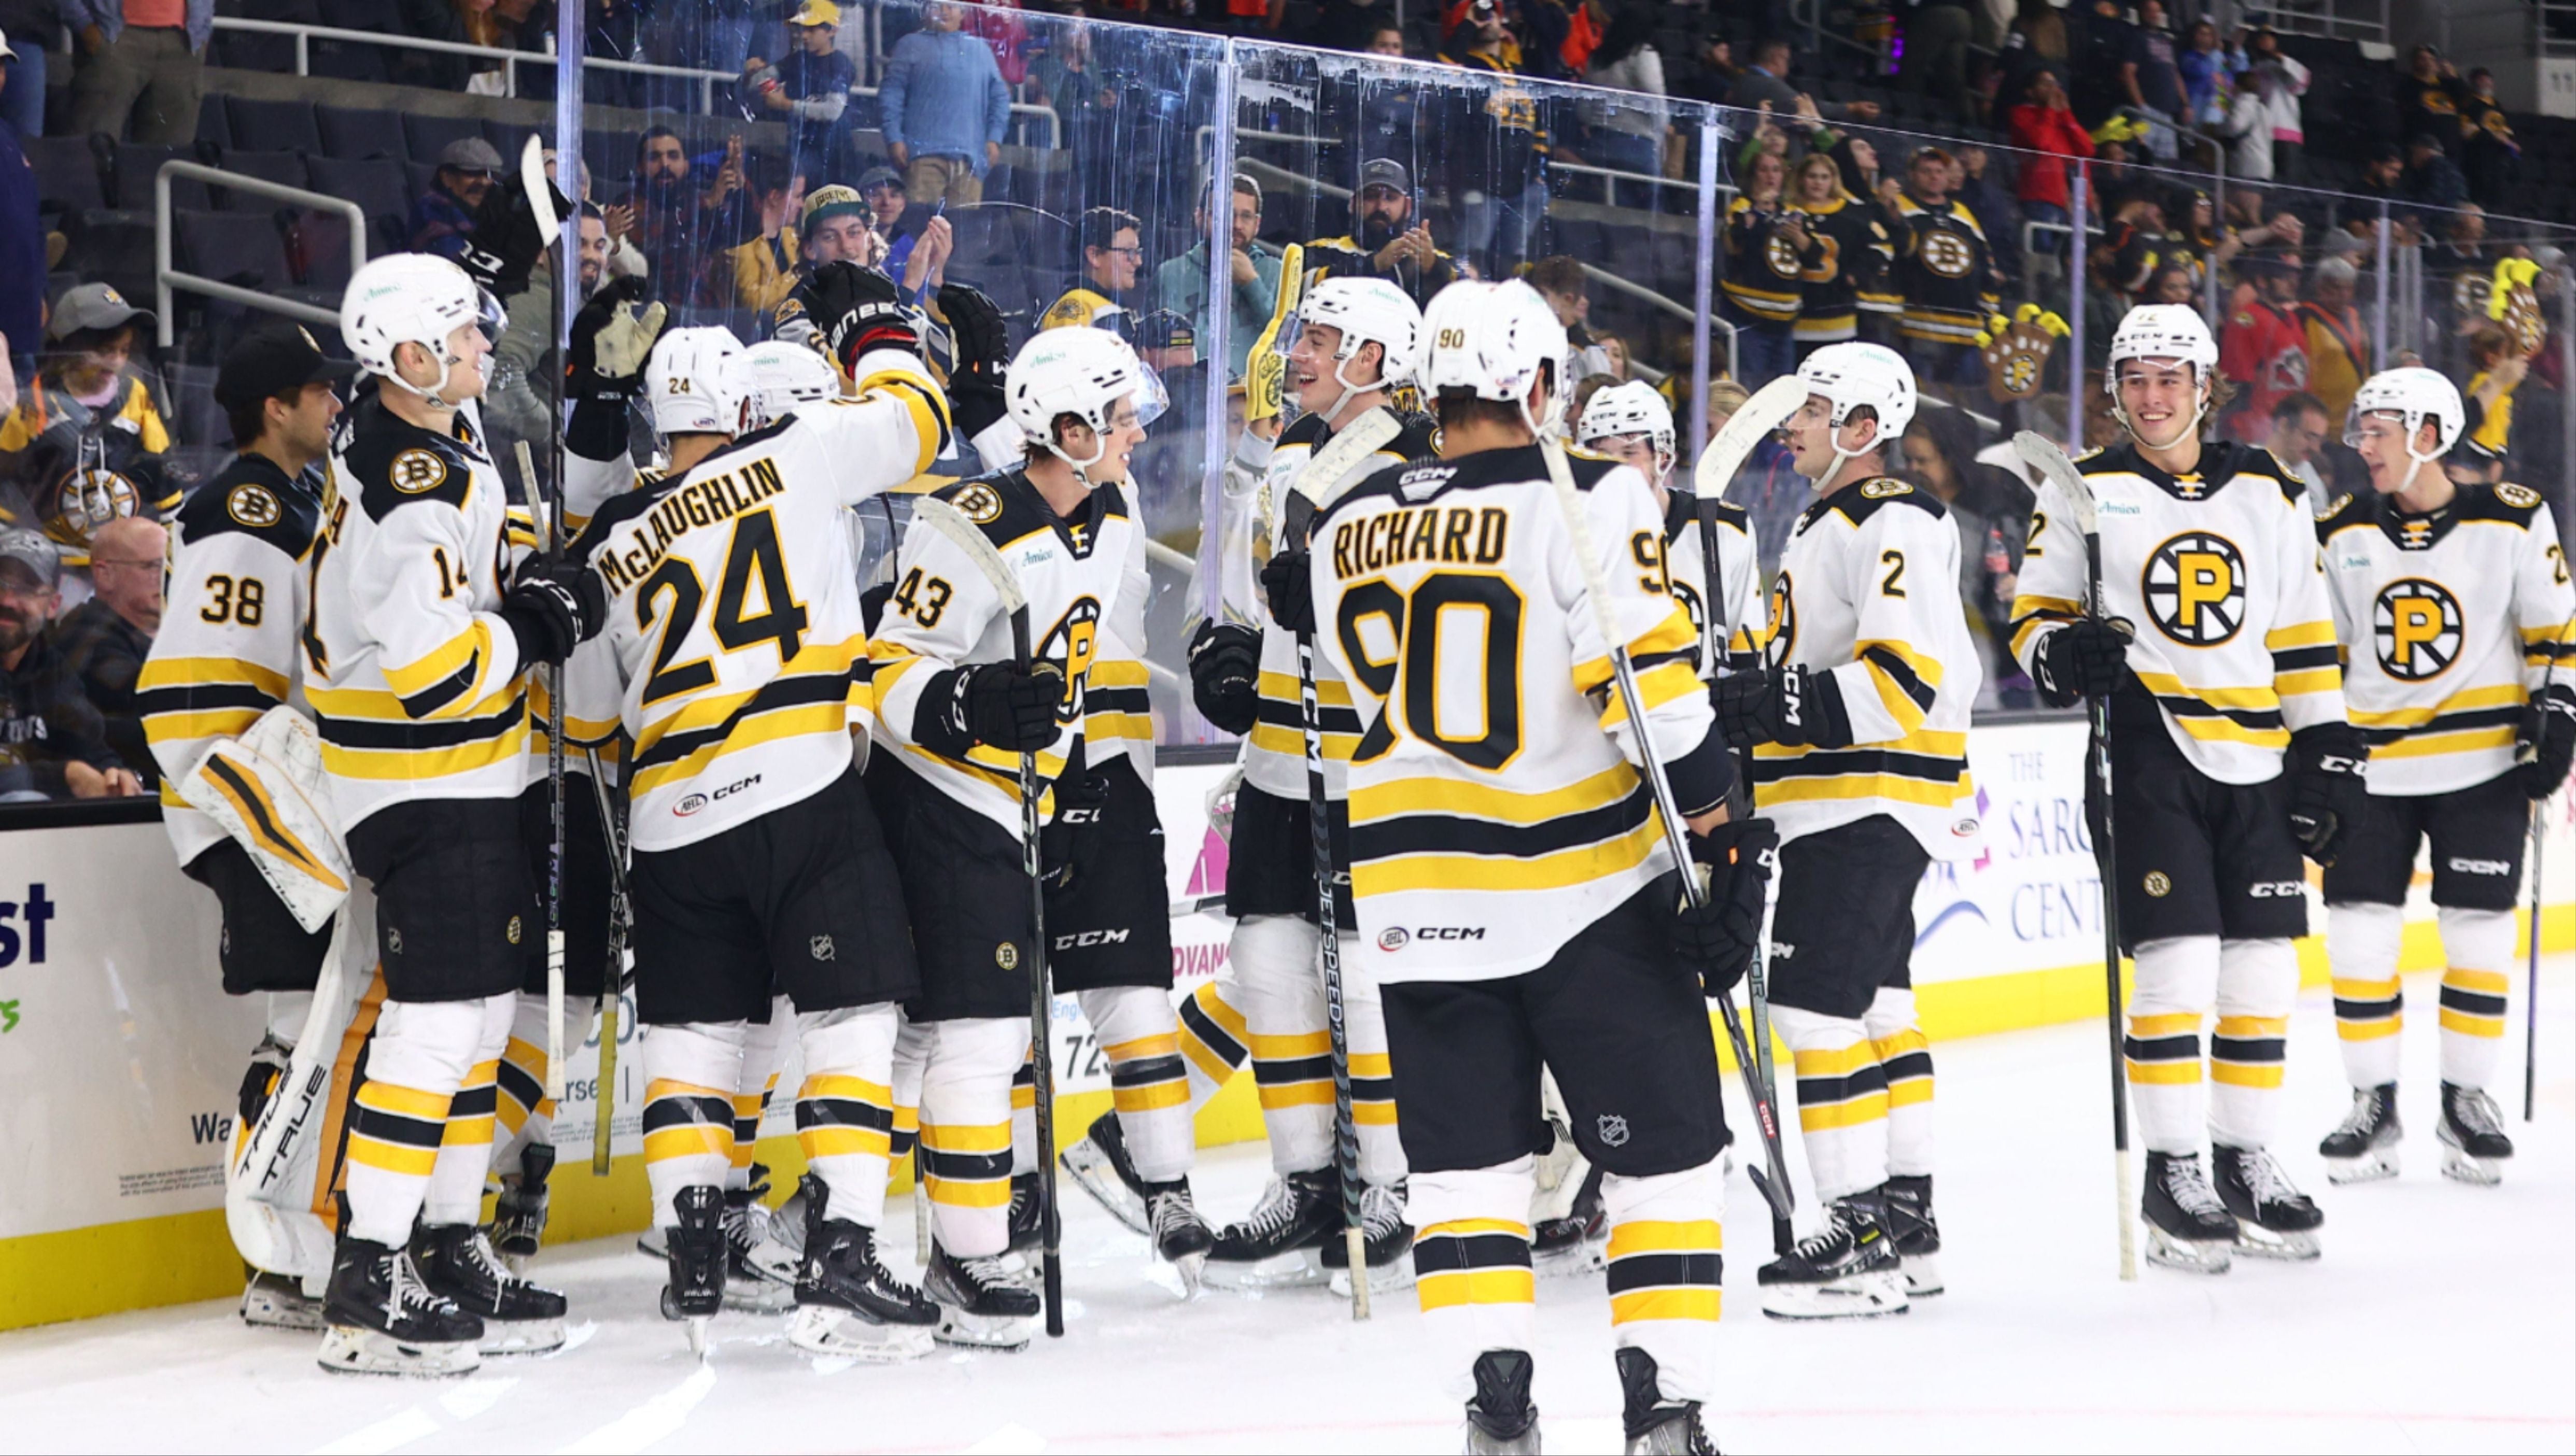 PROVIDENCE BRUINS TO VISIT STATE POLICE COMPLEX AHEAD OF FIRST